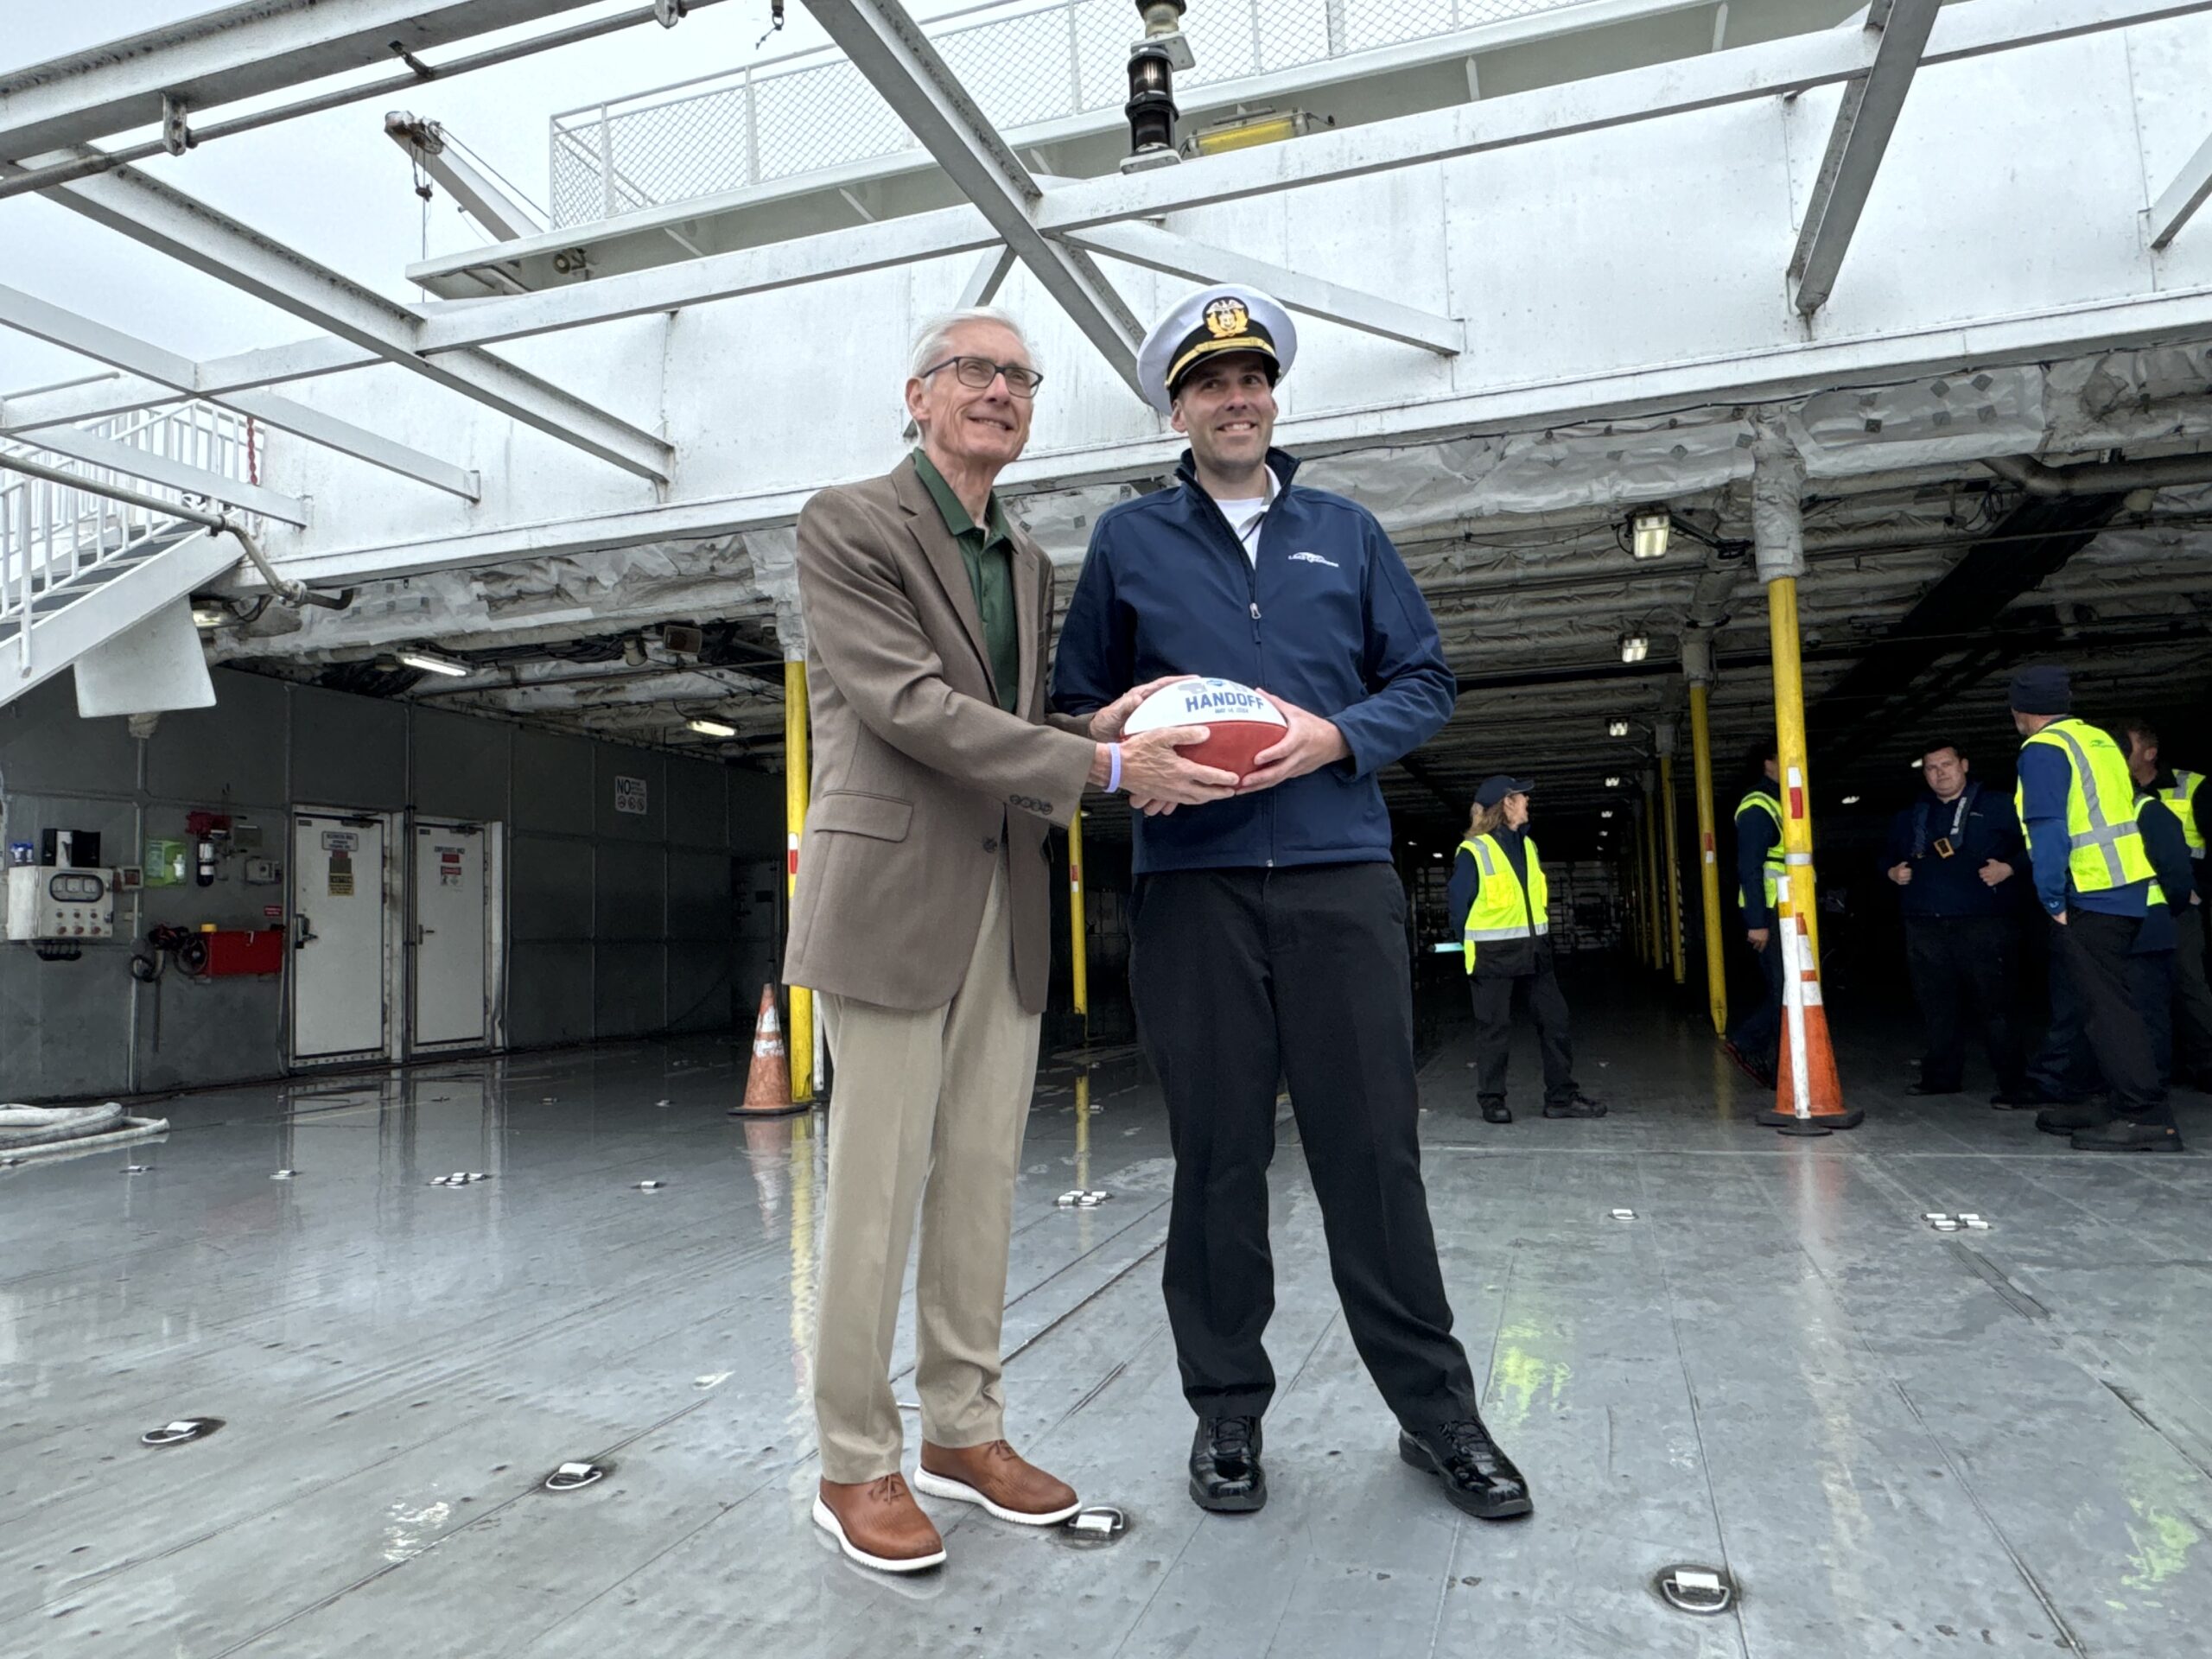 Ceremonial football makes it’s way from Detroit to Green Bay ahead of 2025 NFL Draft